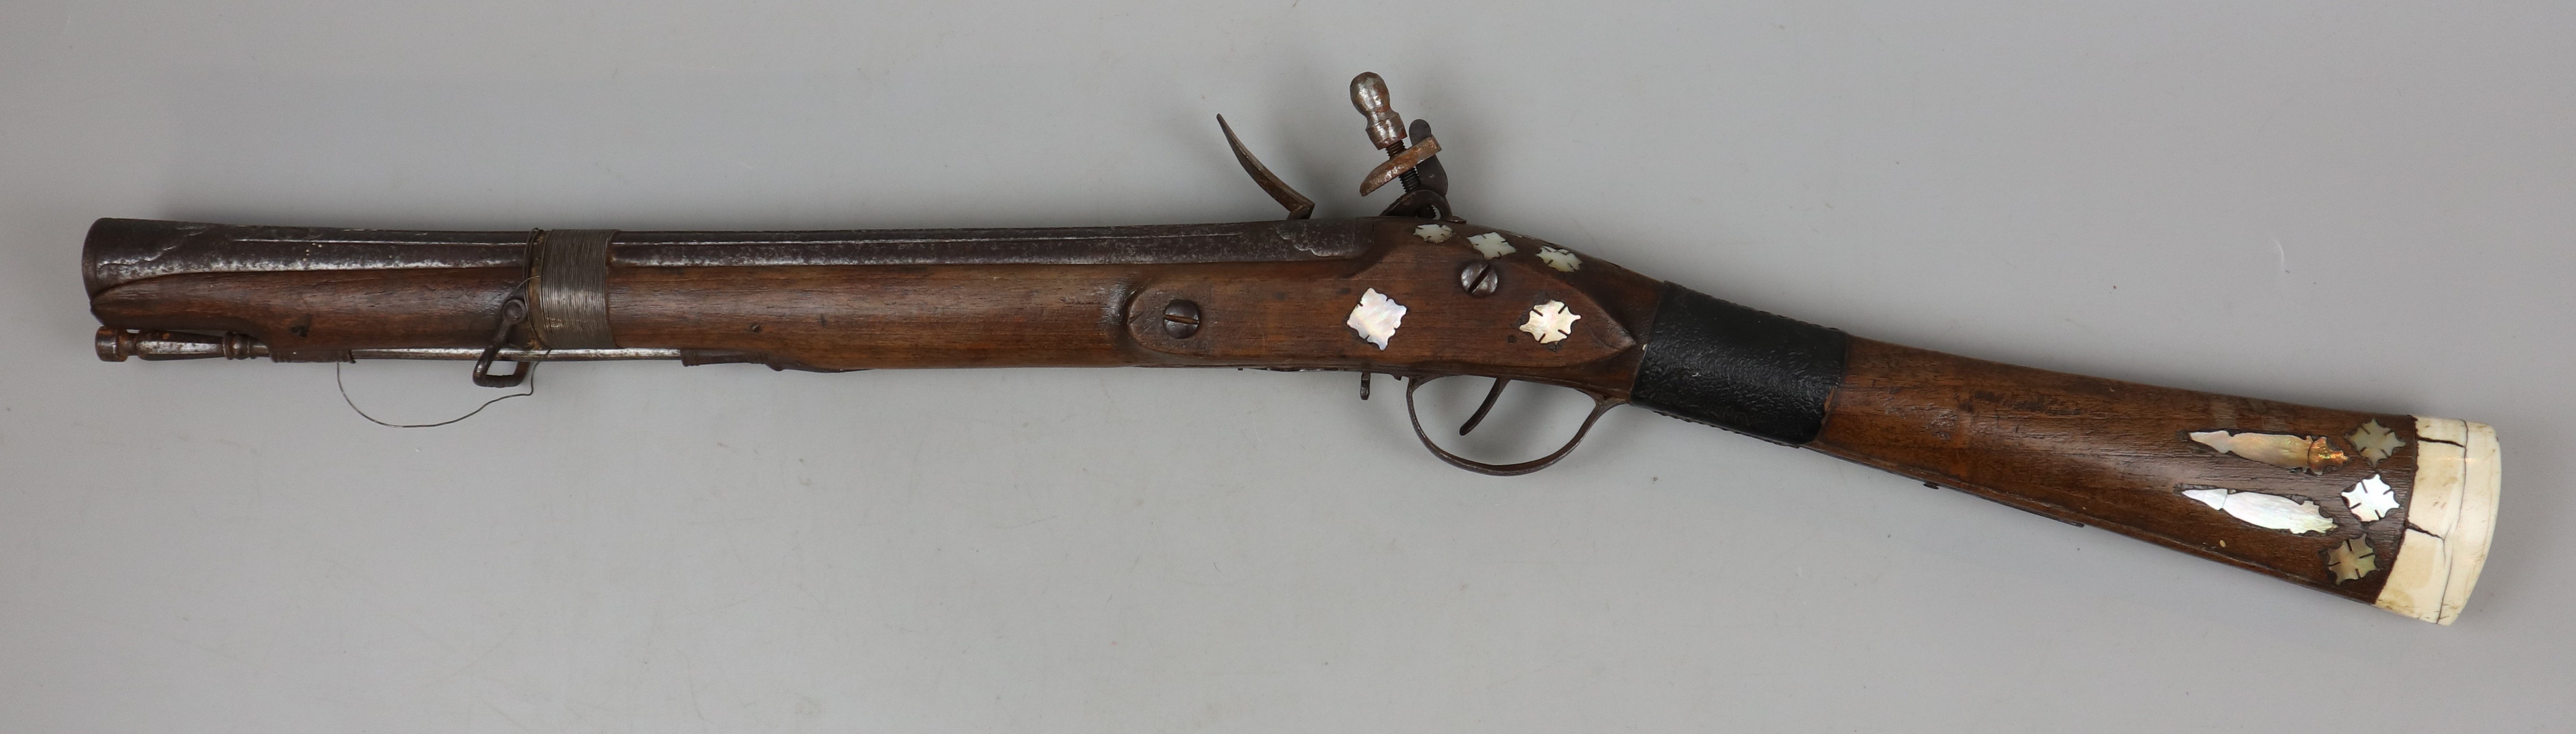 Antique blunderbuss inlaid with mother of pearl - Image 2 of 4